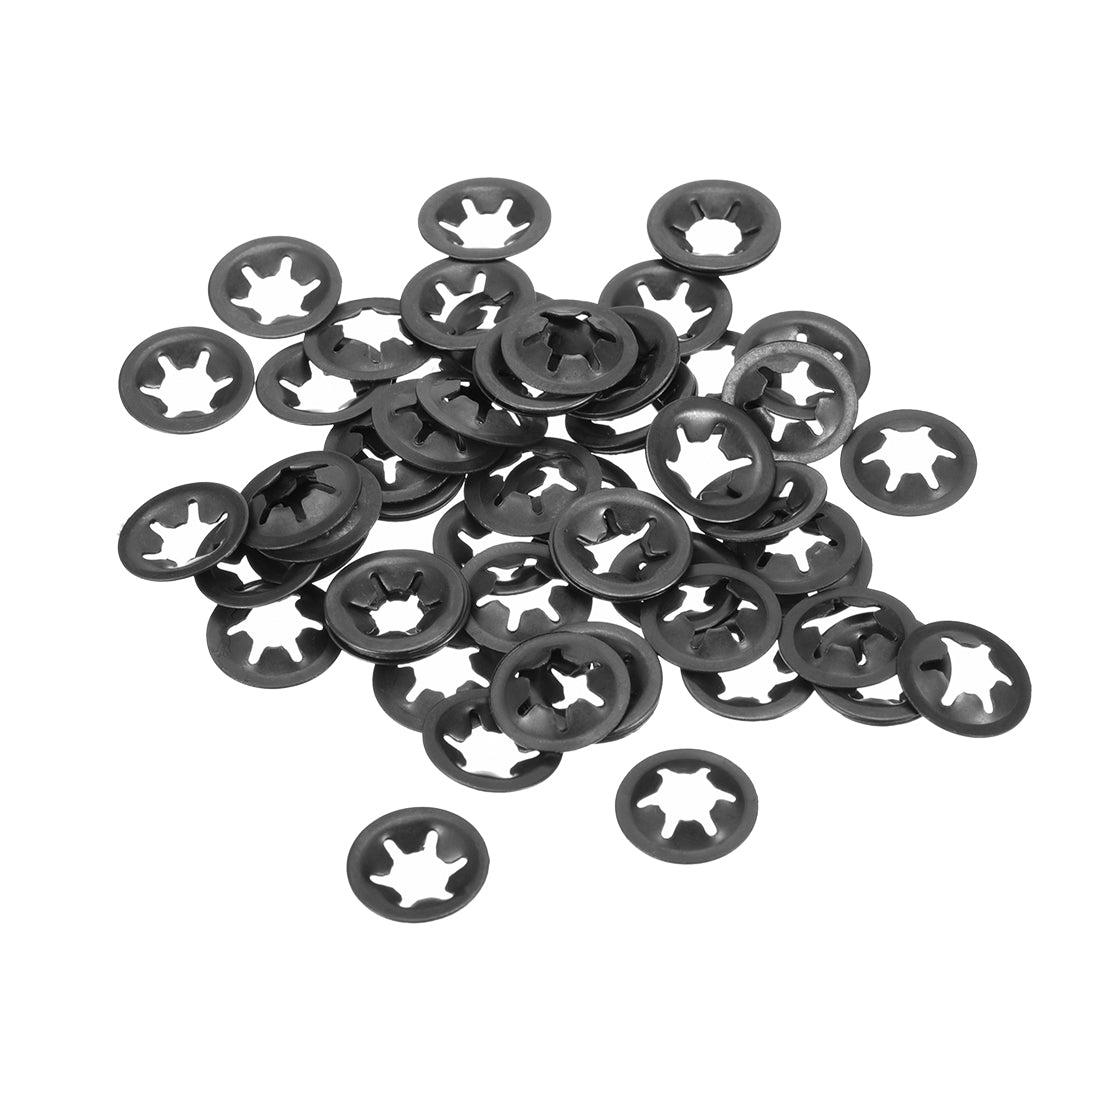 Uxcell Uxcell M10 Internal Tooth Star Locking Washer 9.2mm I.D. 20mm O.D. Lock Washers Push On Locking Speed Clip, 65Mn Black Oxide Finish 60pcs